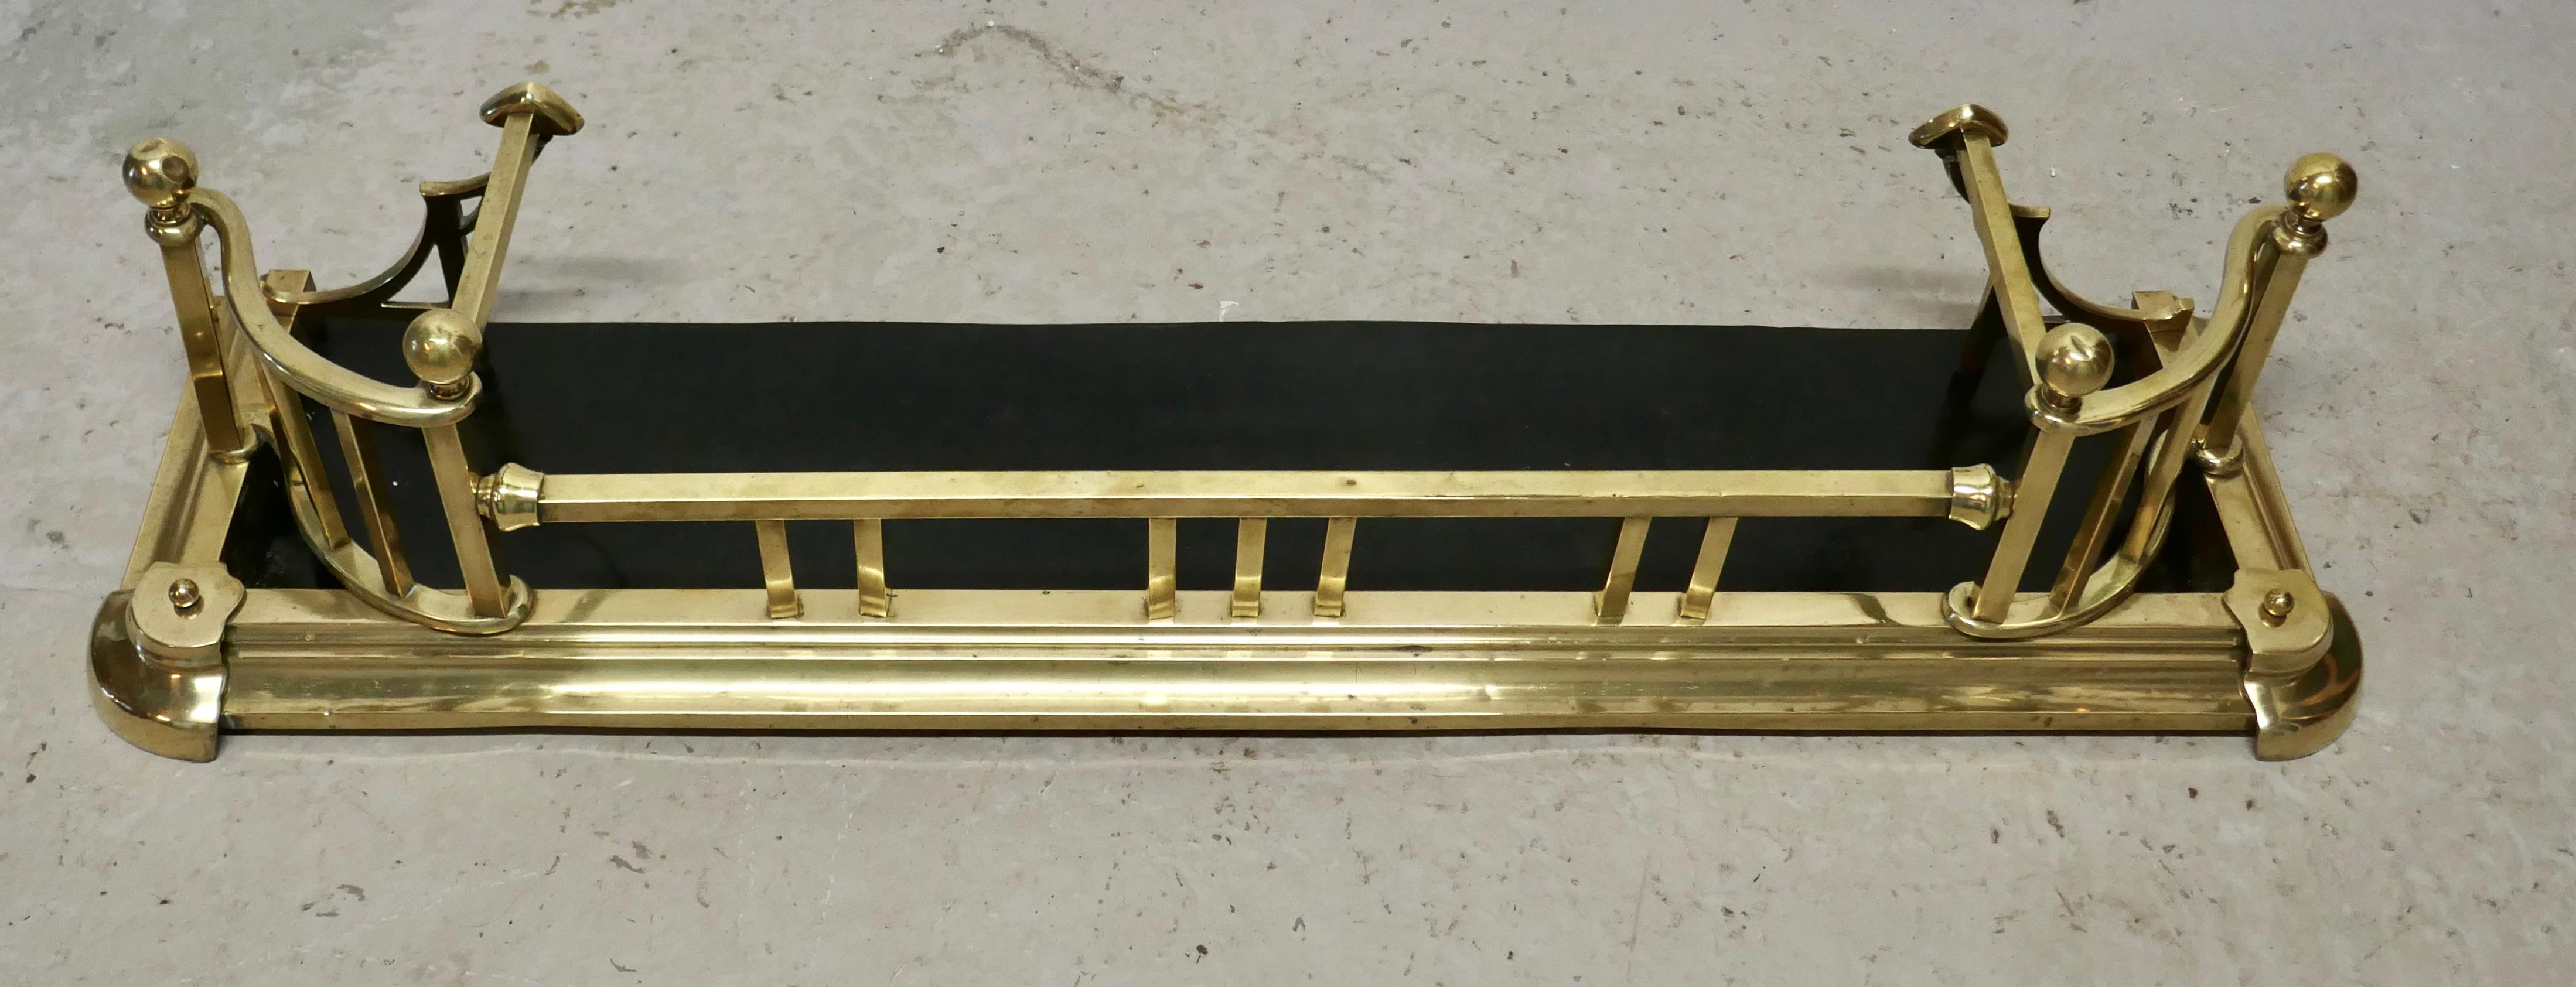 Large Victorian Arts & Crafts brass fender

 This is a beautifully designed brass fender it has a superb brass surround with rests on each side to lay your fire irons tools and chunky brass knobs 
The fender is in very good condition it is 12”